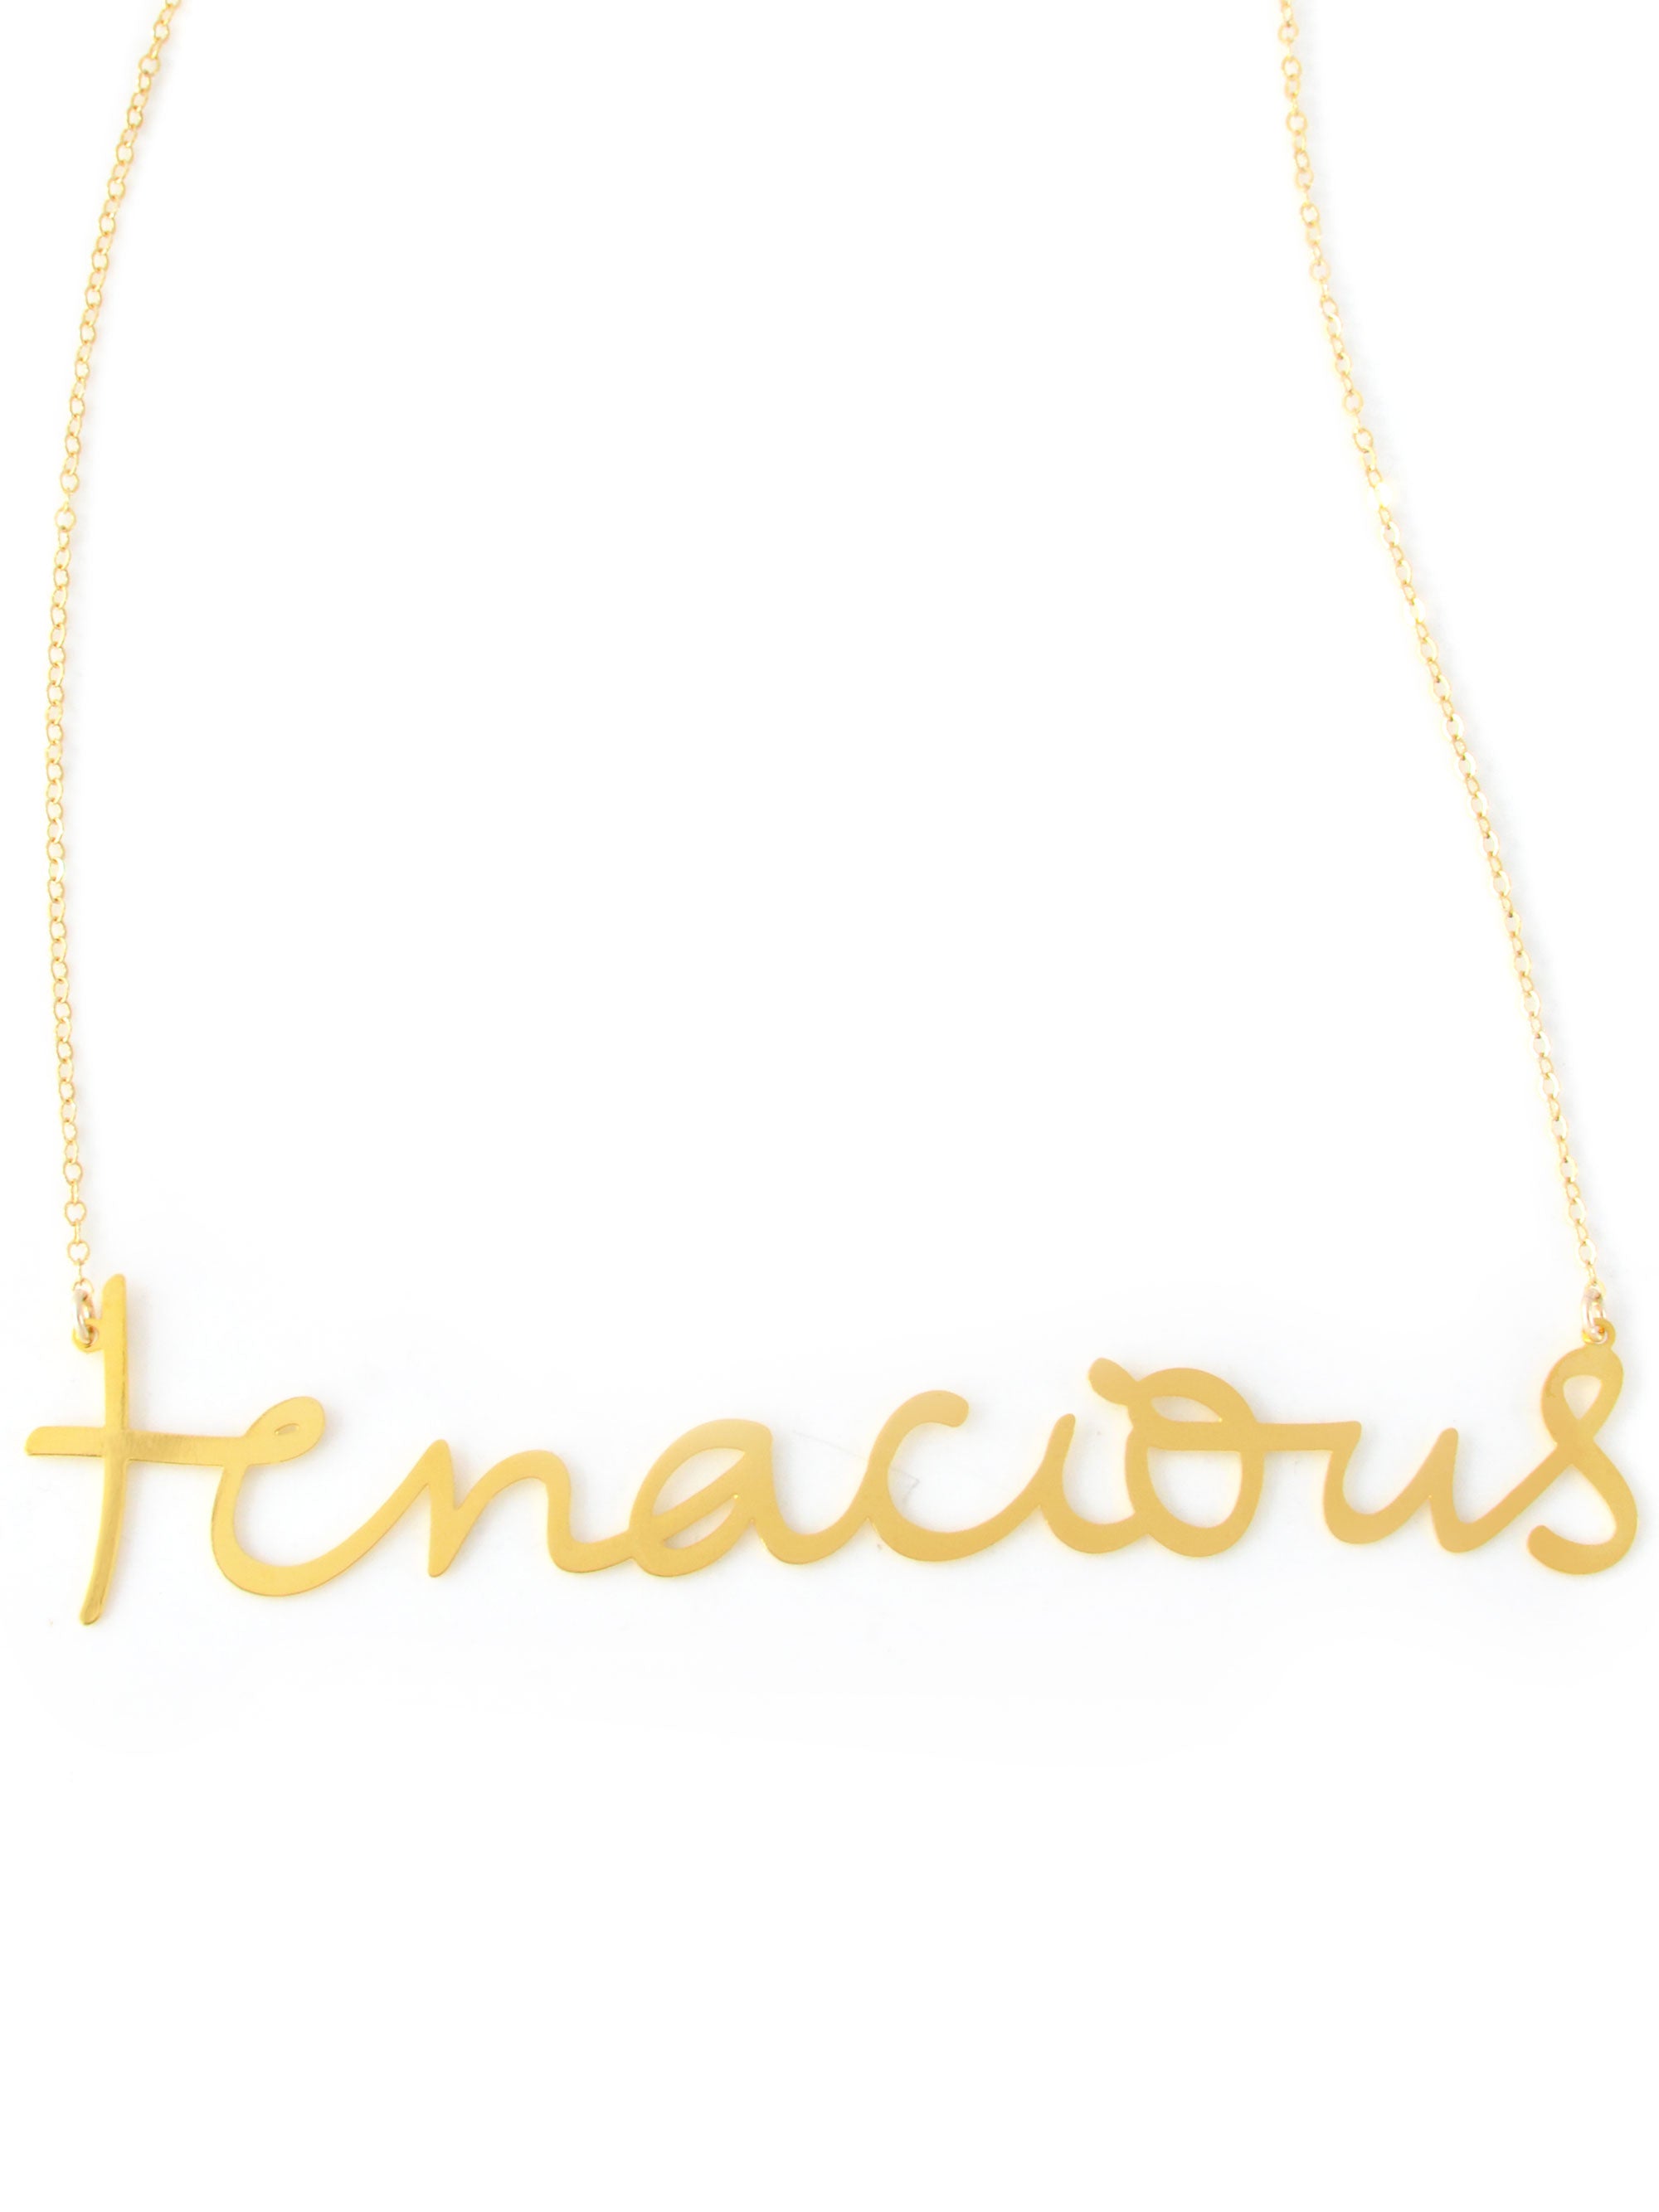 Tenacious Necklace - High Quality, Affordable, Hand Written, Empowering, Self Love, Mantra Word Necklace - Available in Gold and Silver - Small and Large Sizes - Made in USA - Brevity Jewelry